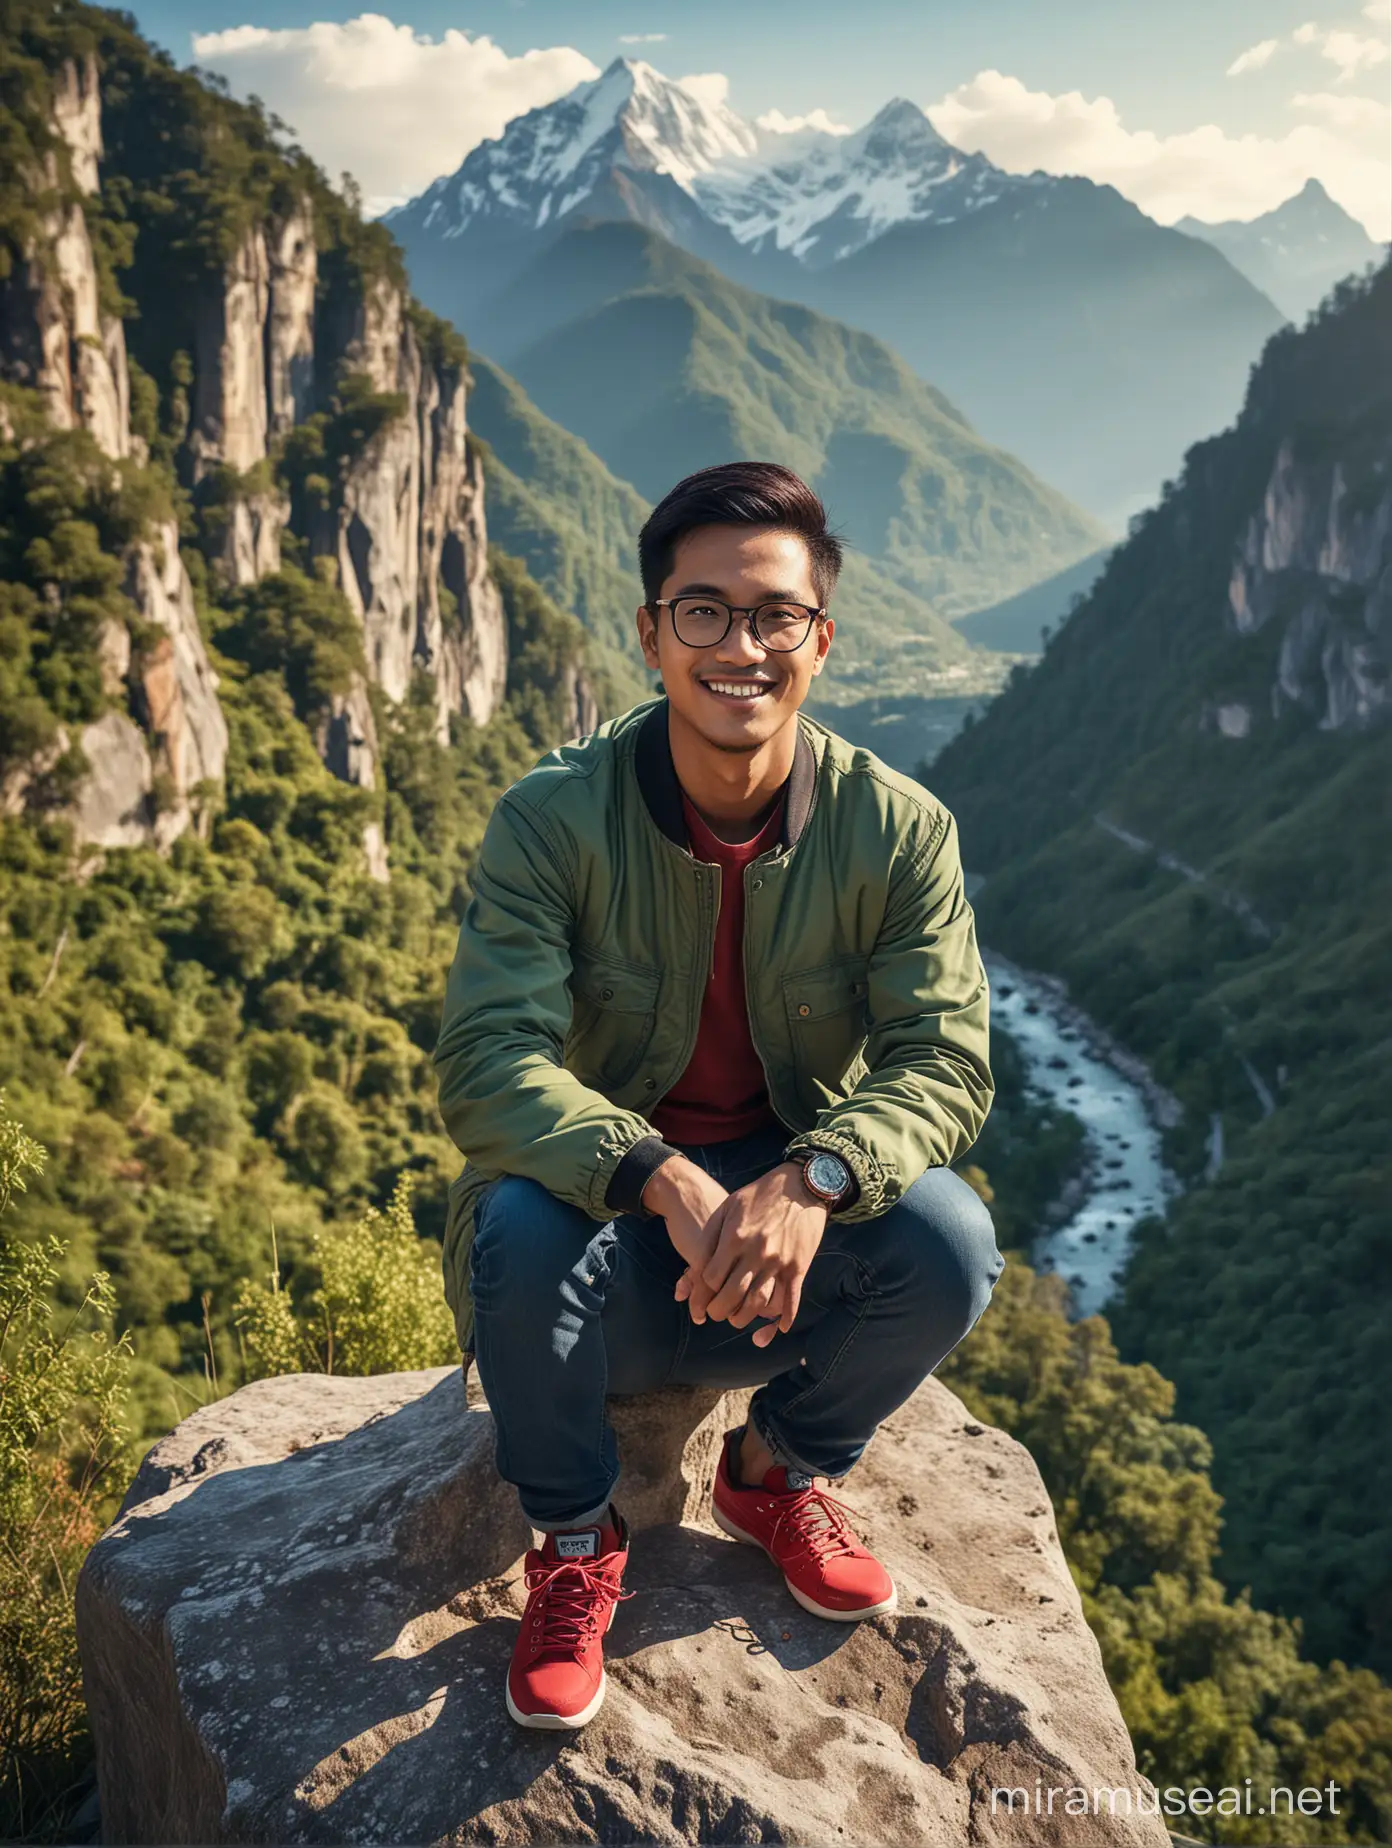 Handsome Indonesian Man in Green Jacket Smiling on Mountain Rock